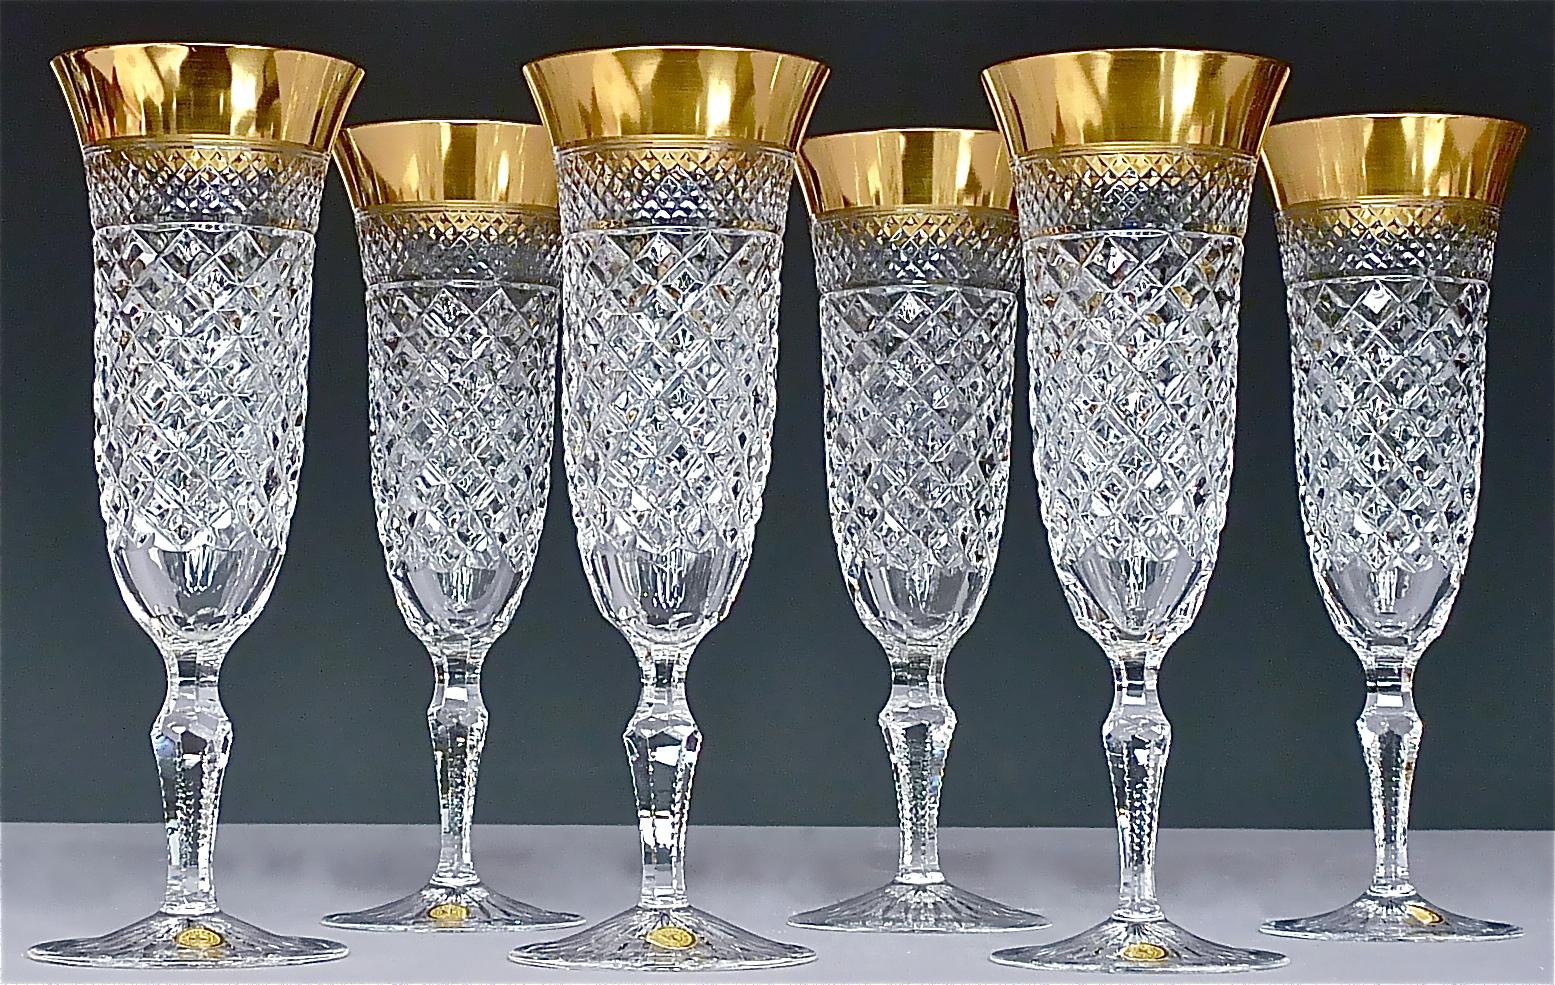 Faceted Precious 6 Champagne Glasses Gold Crystal Glass Stemware Josephinenhuette Moser For Sale